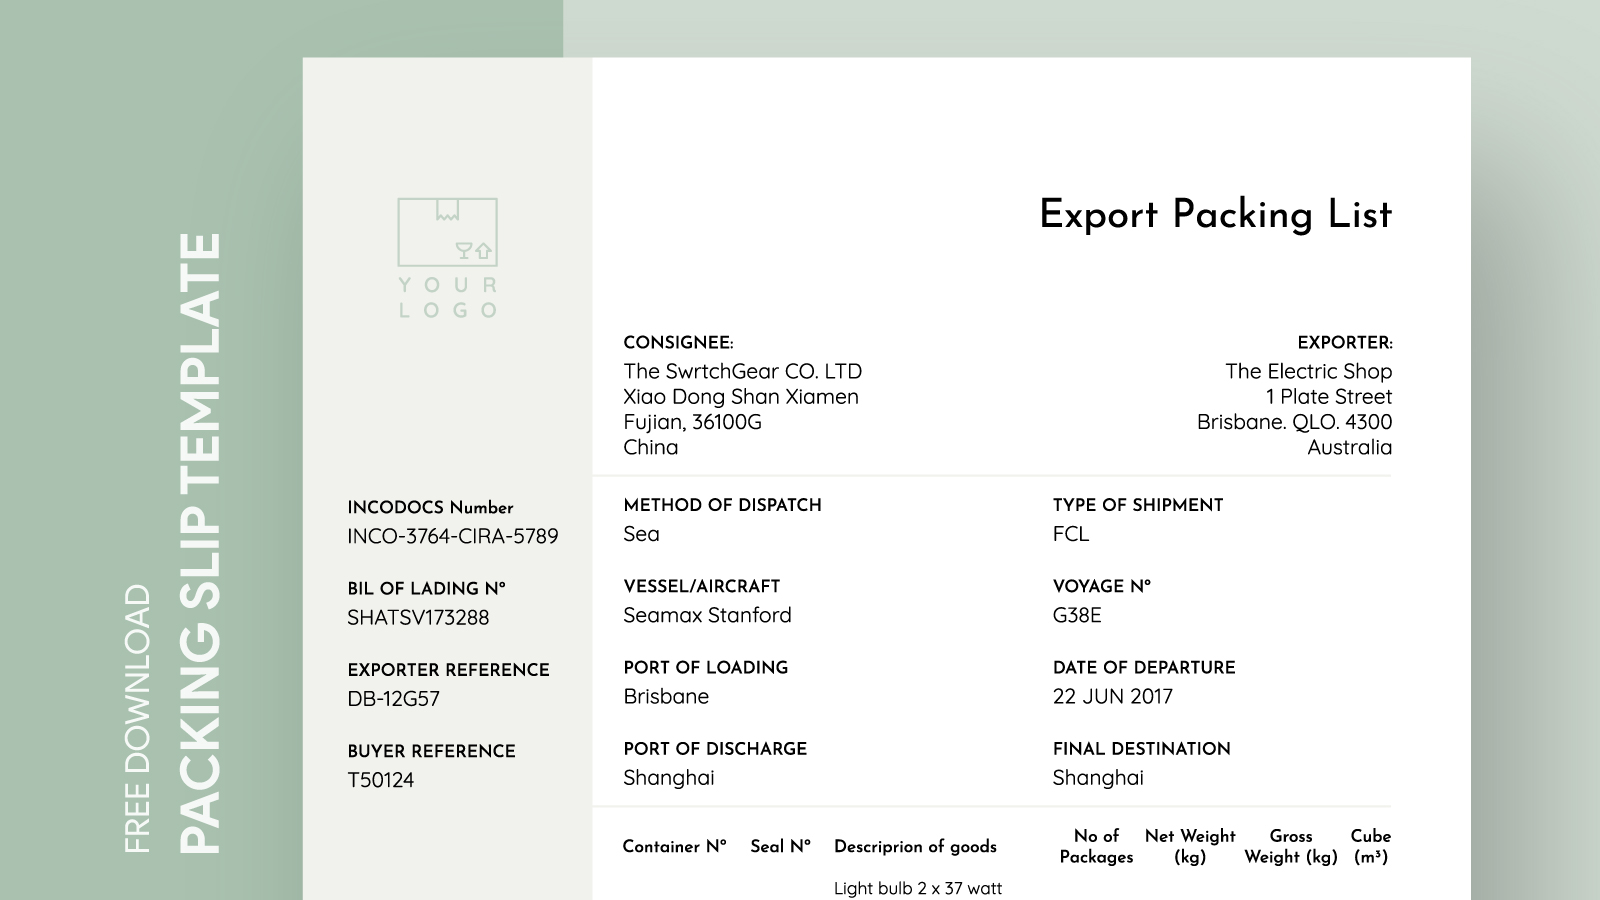 Export Packing List Free Google Docs Template gdoc.io